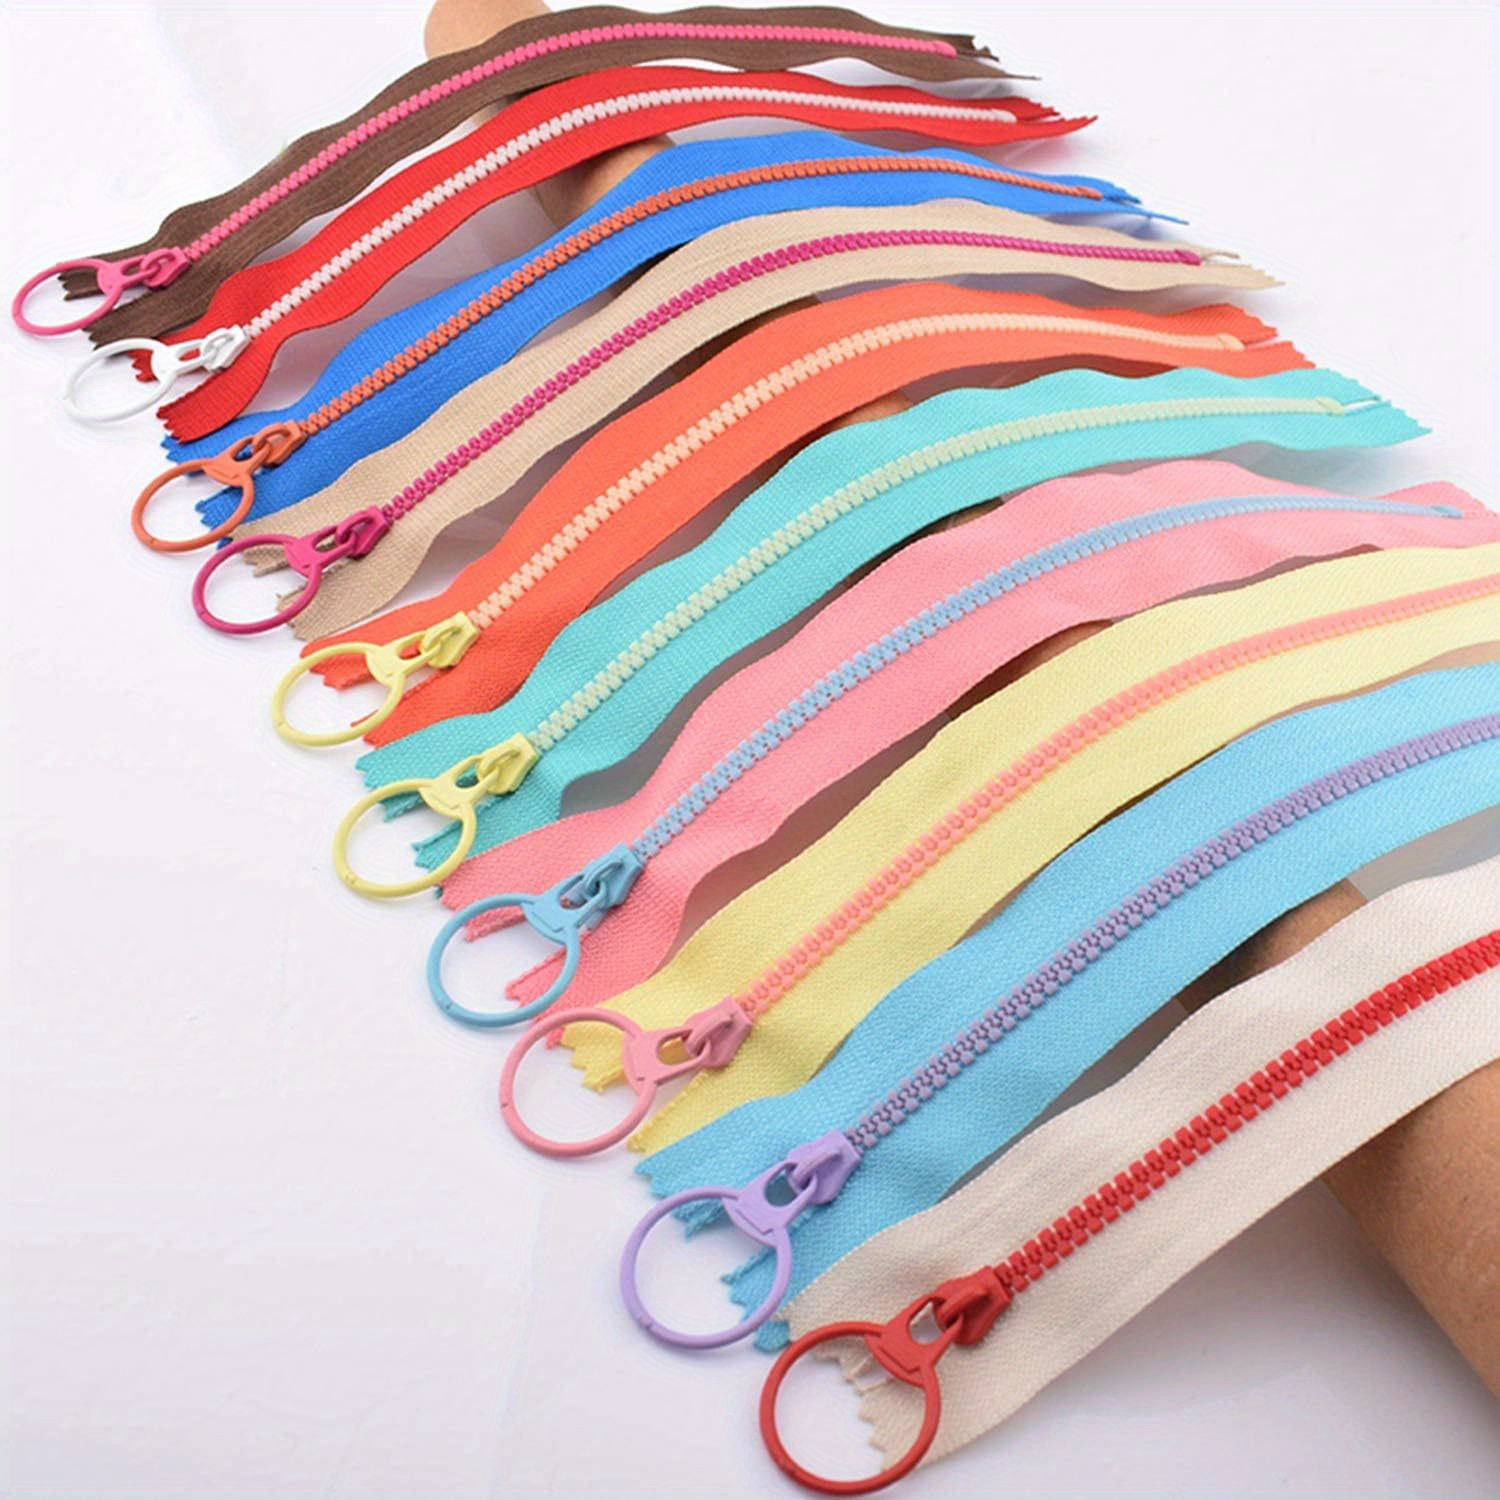  XPIT 10pcs 3# 25-50cm Invisible Zippers for Sewing Clothes Bags  Accessories Nylon Coil Zipper Customized DIY (Color : Rose, Size : Total  Long 40cm)